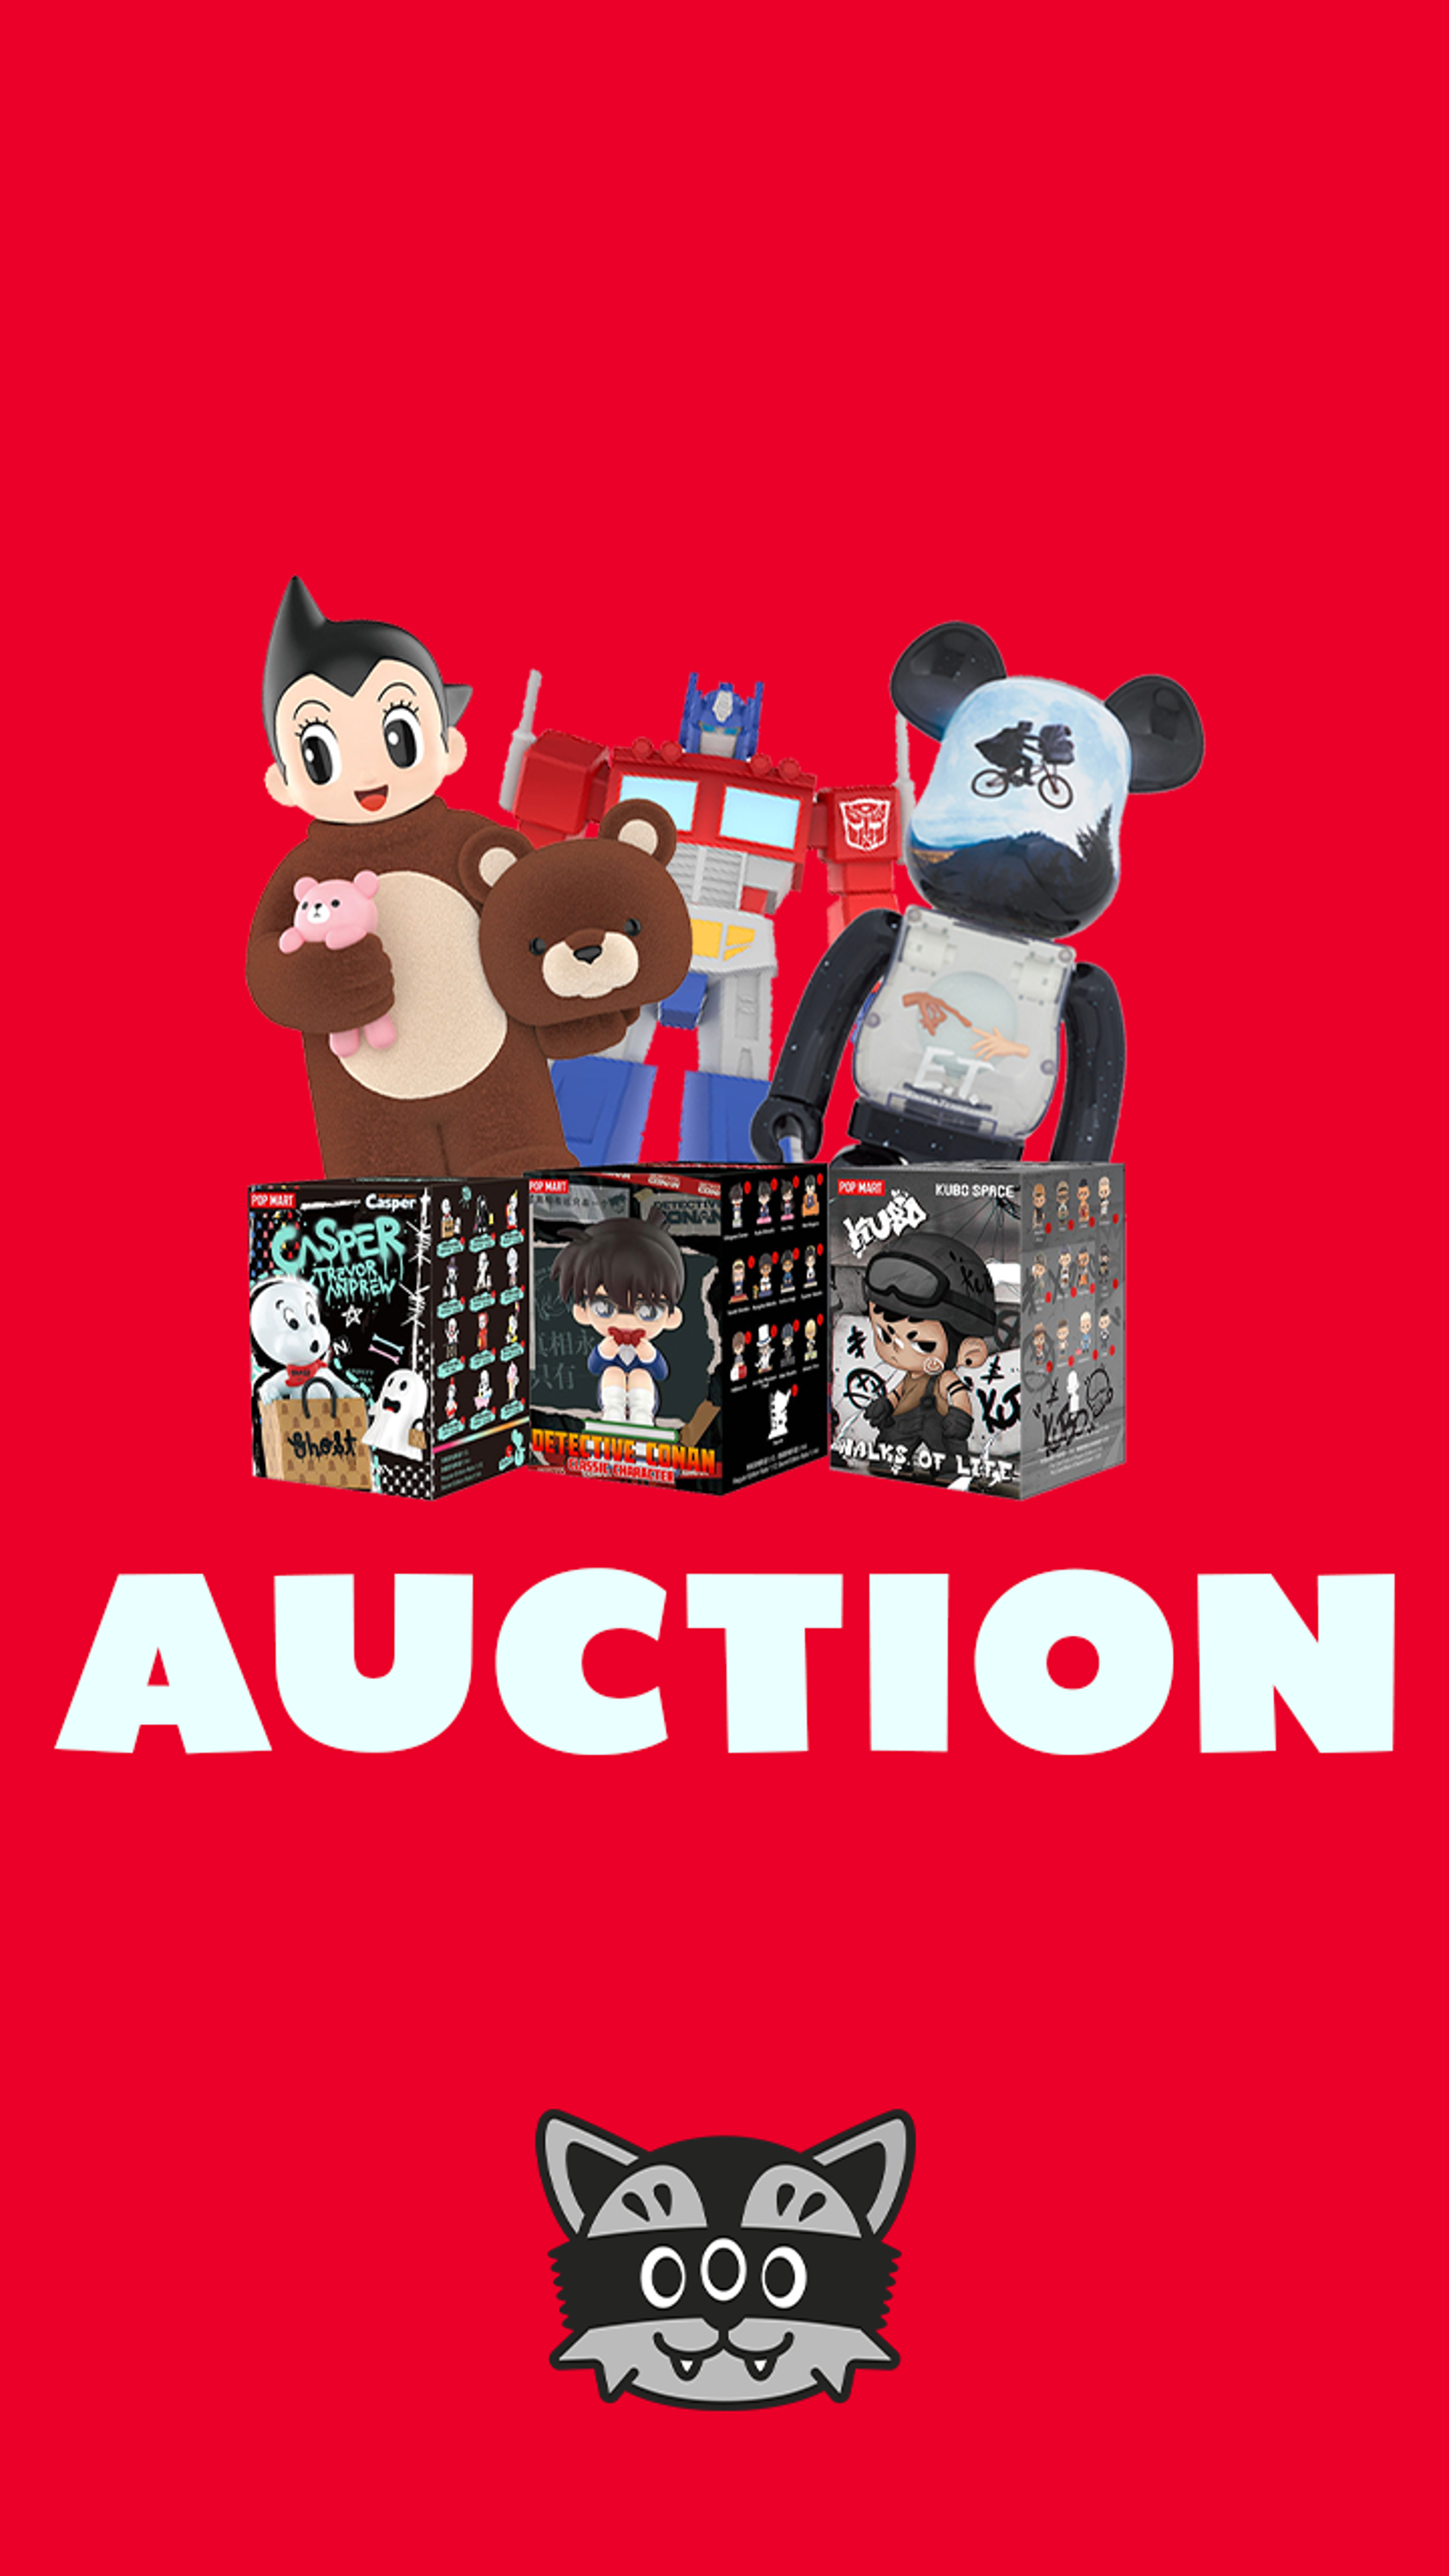 Preview image for the show titled "Mindzai Auction - April 30" at Today @ 5:00 PM